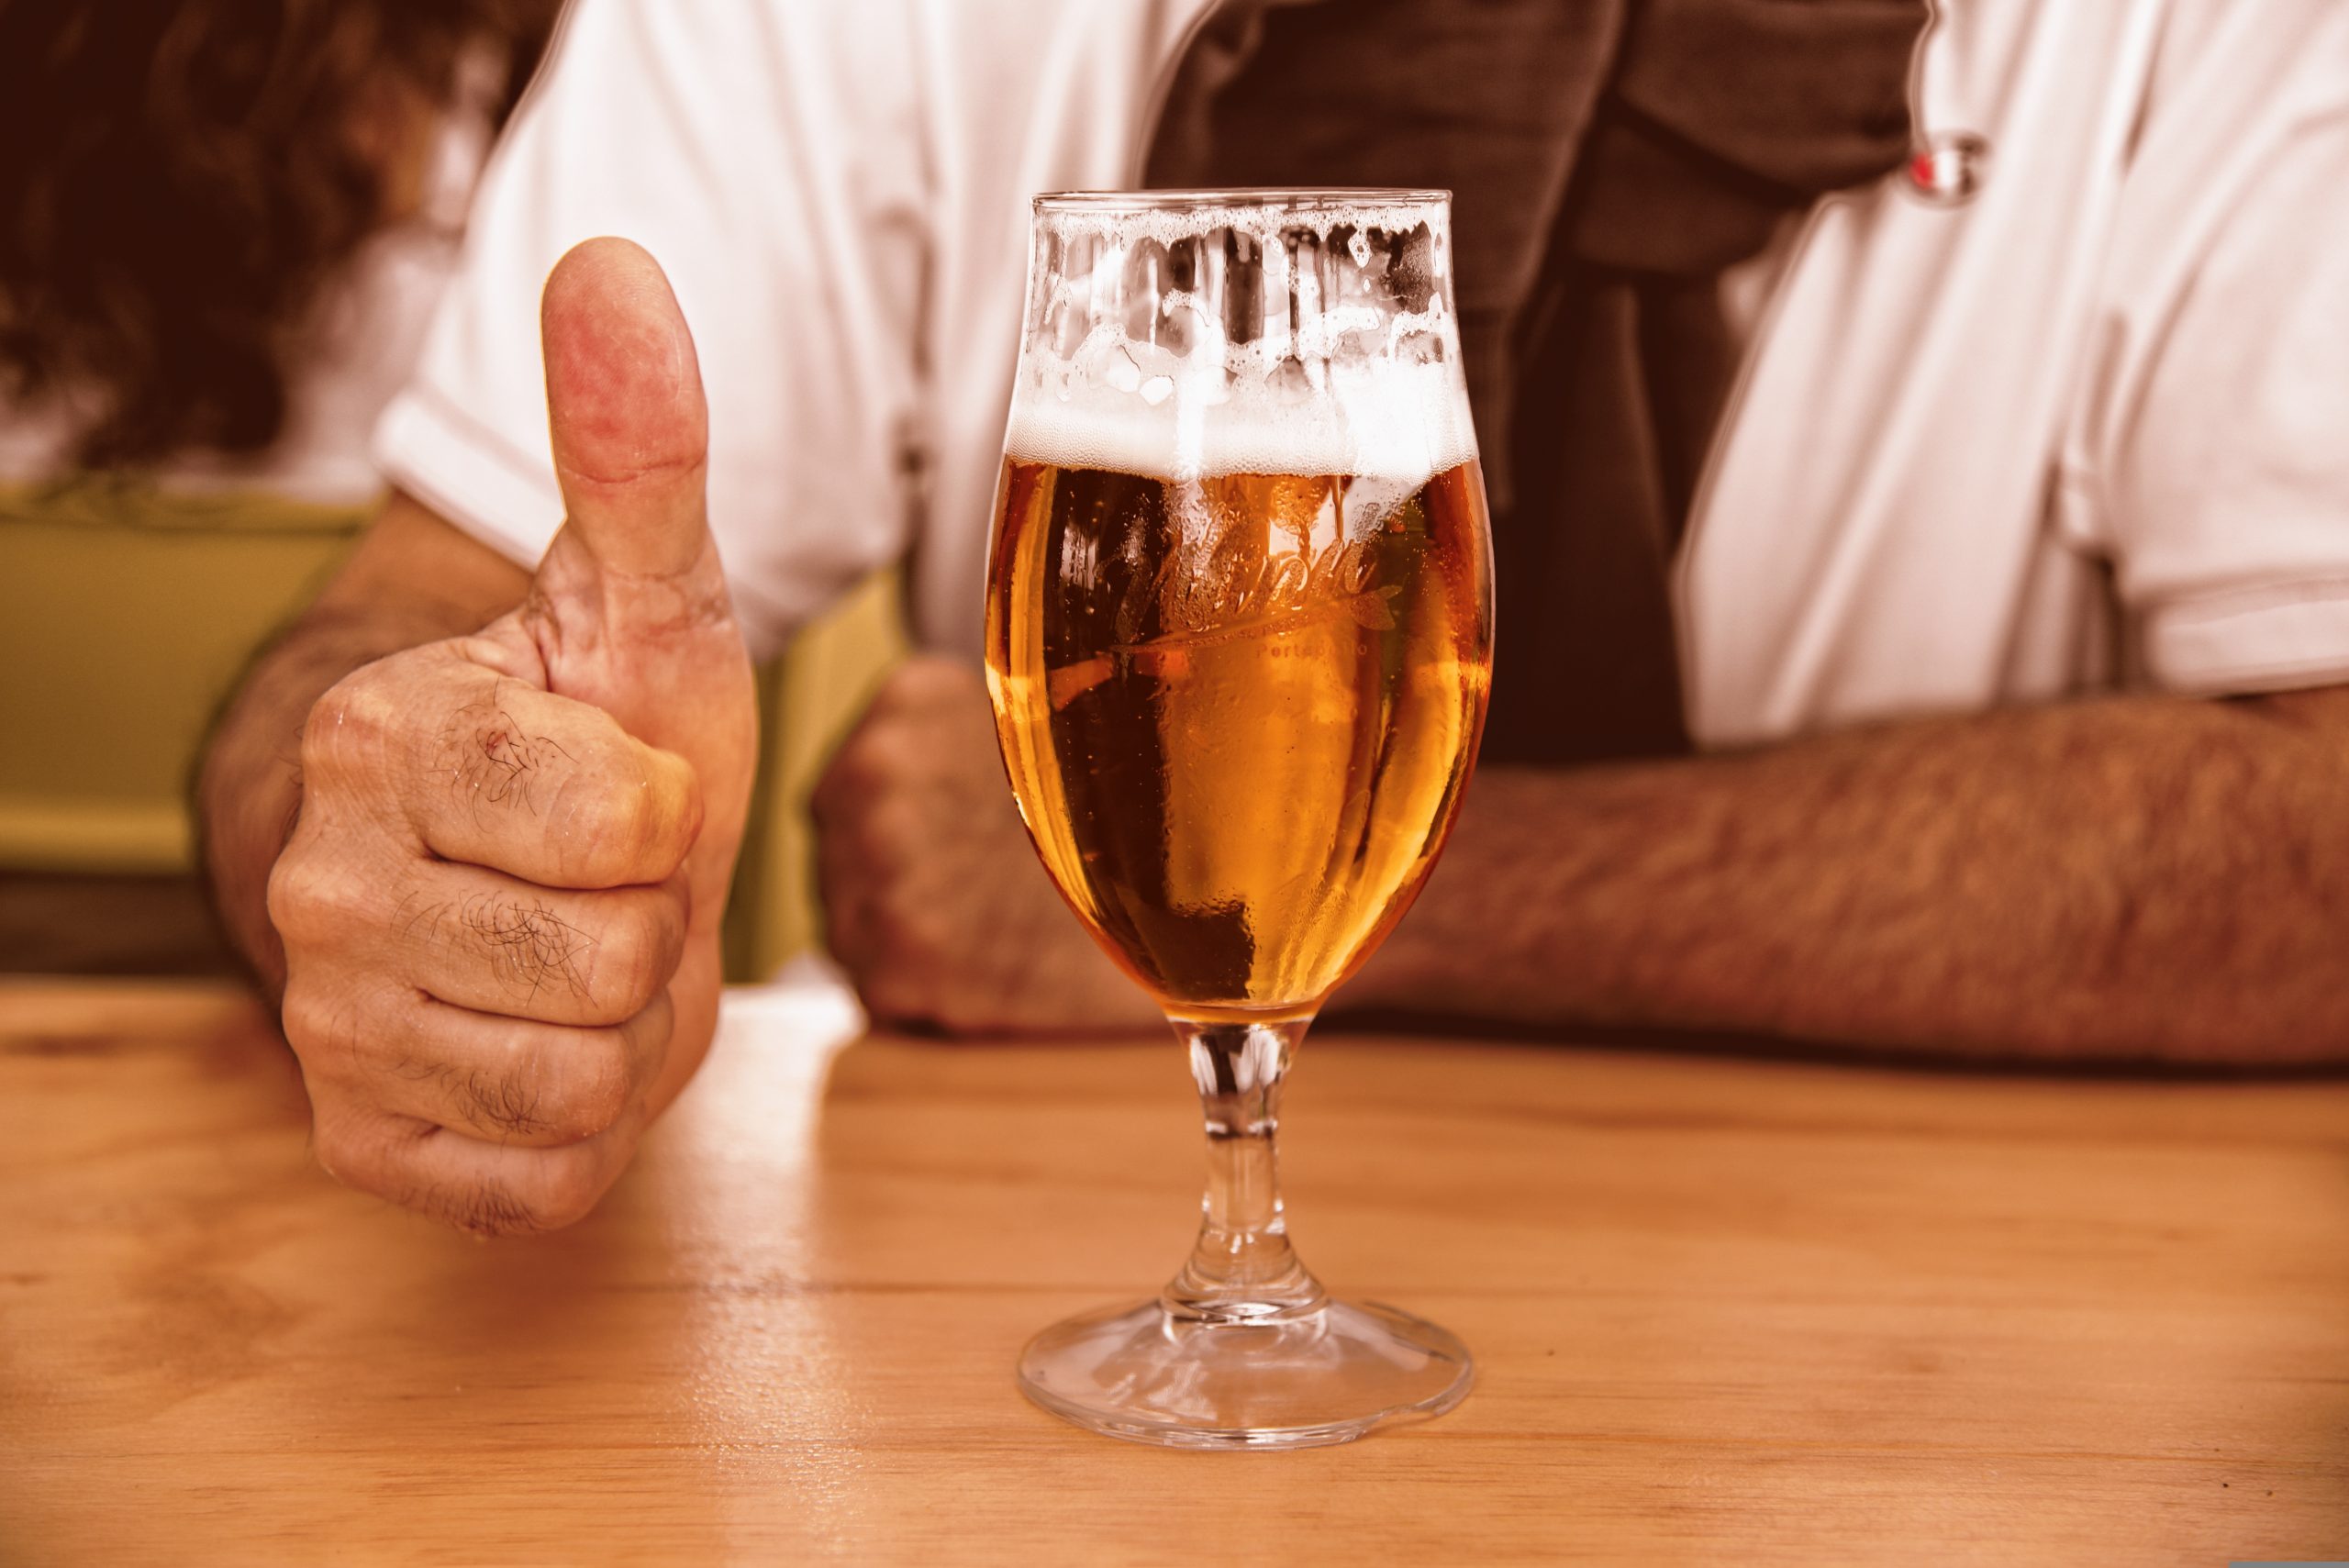 Caña believe it! New study on beer reveals Spain's favourite drink can have a range of health benefits